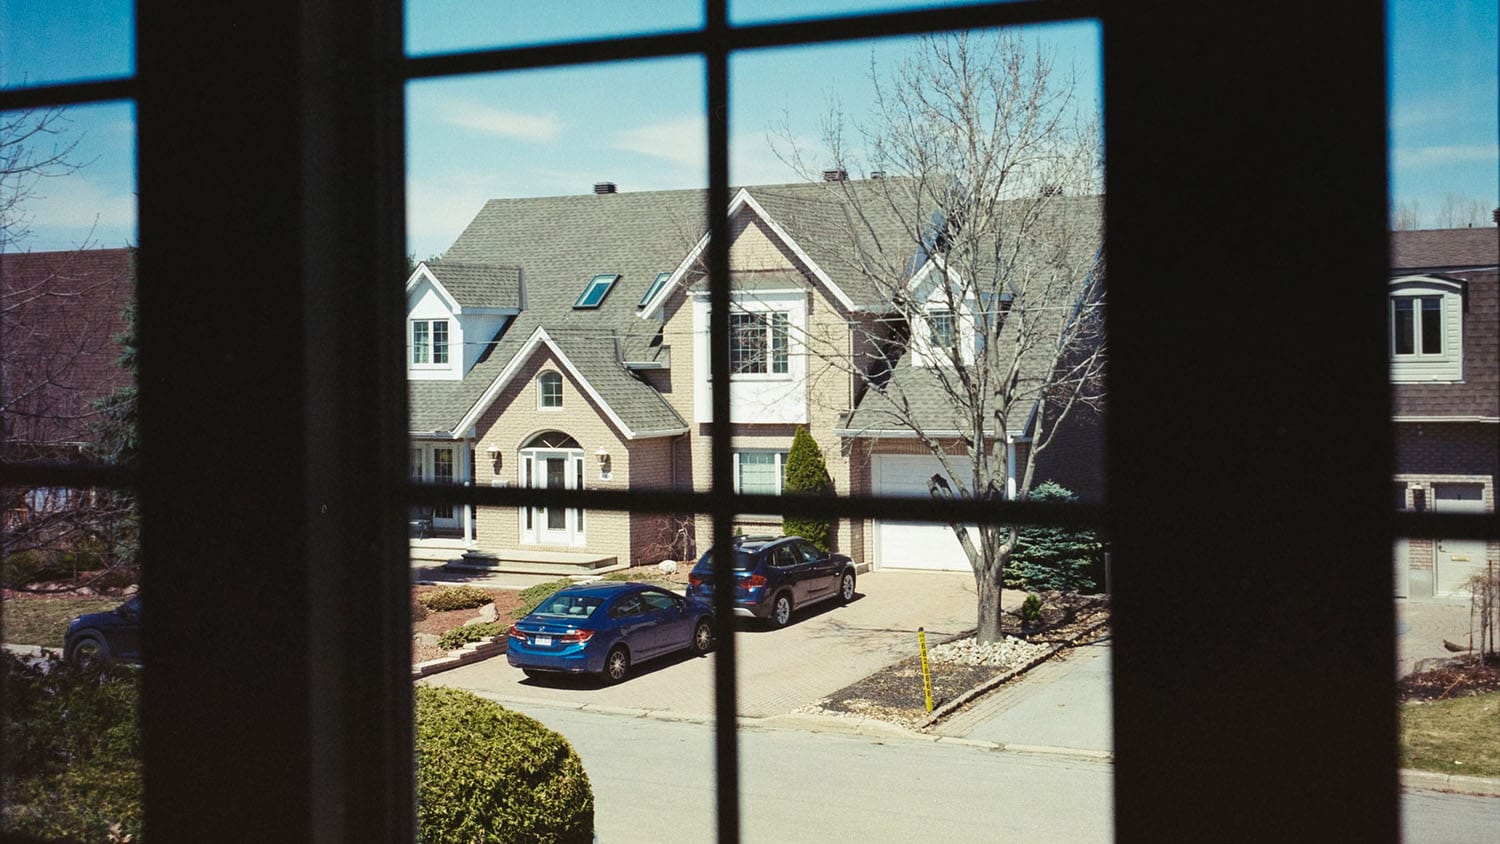 view of a suburban street from the window of one of the homes